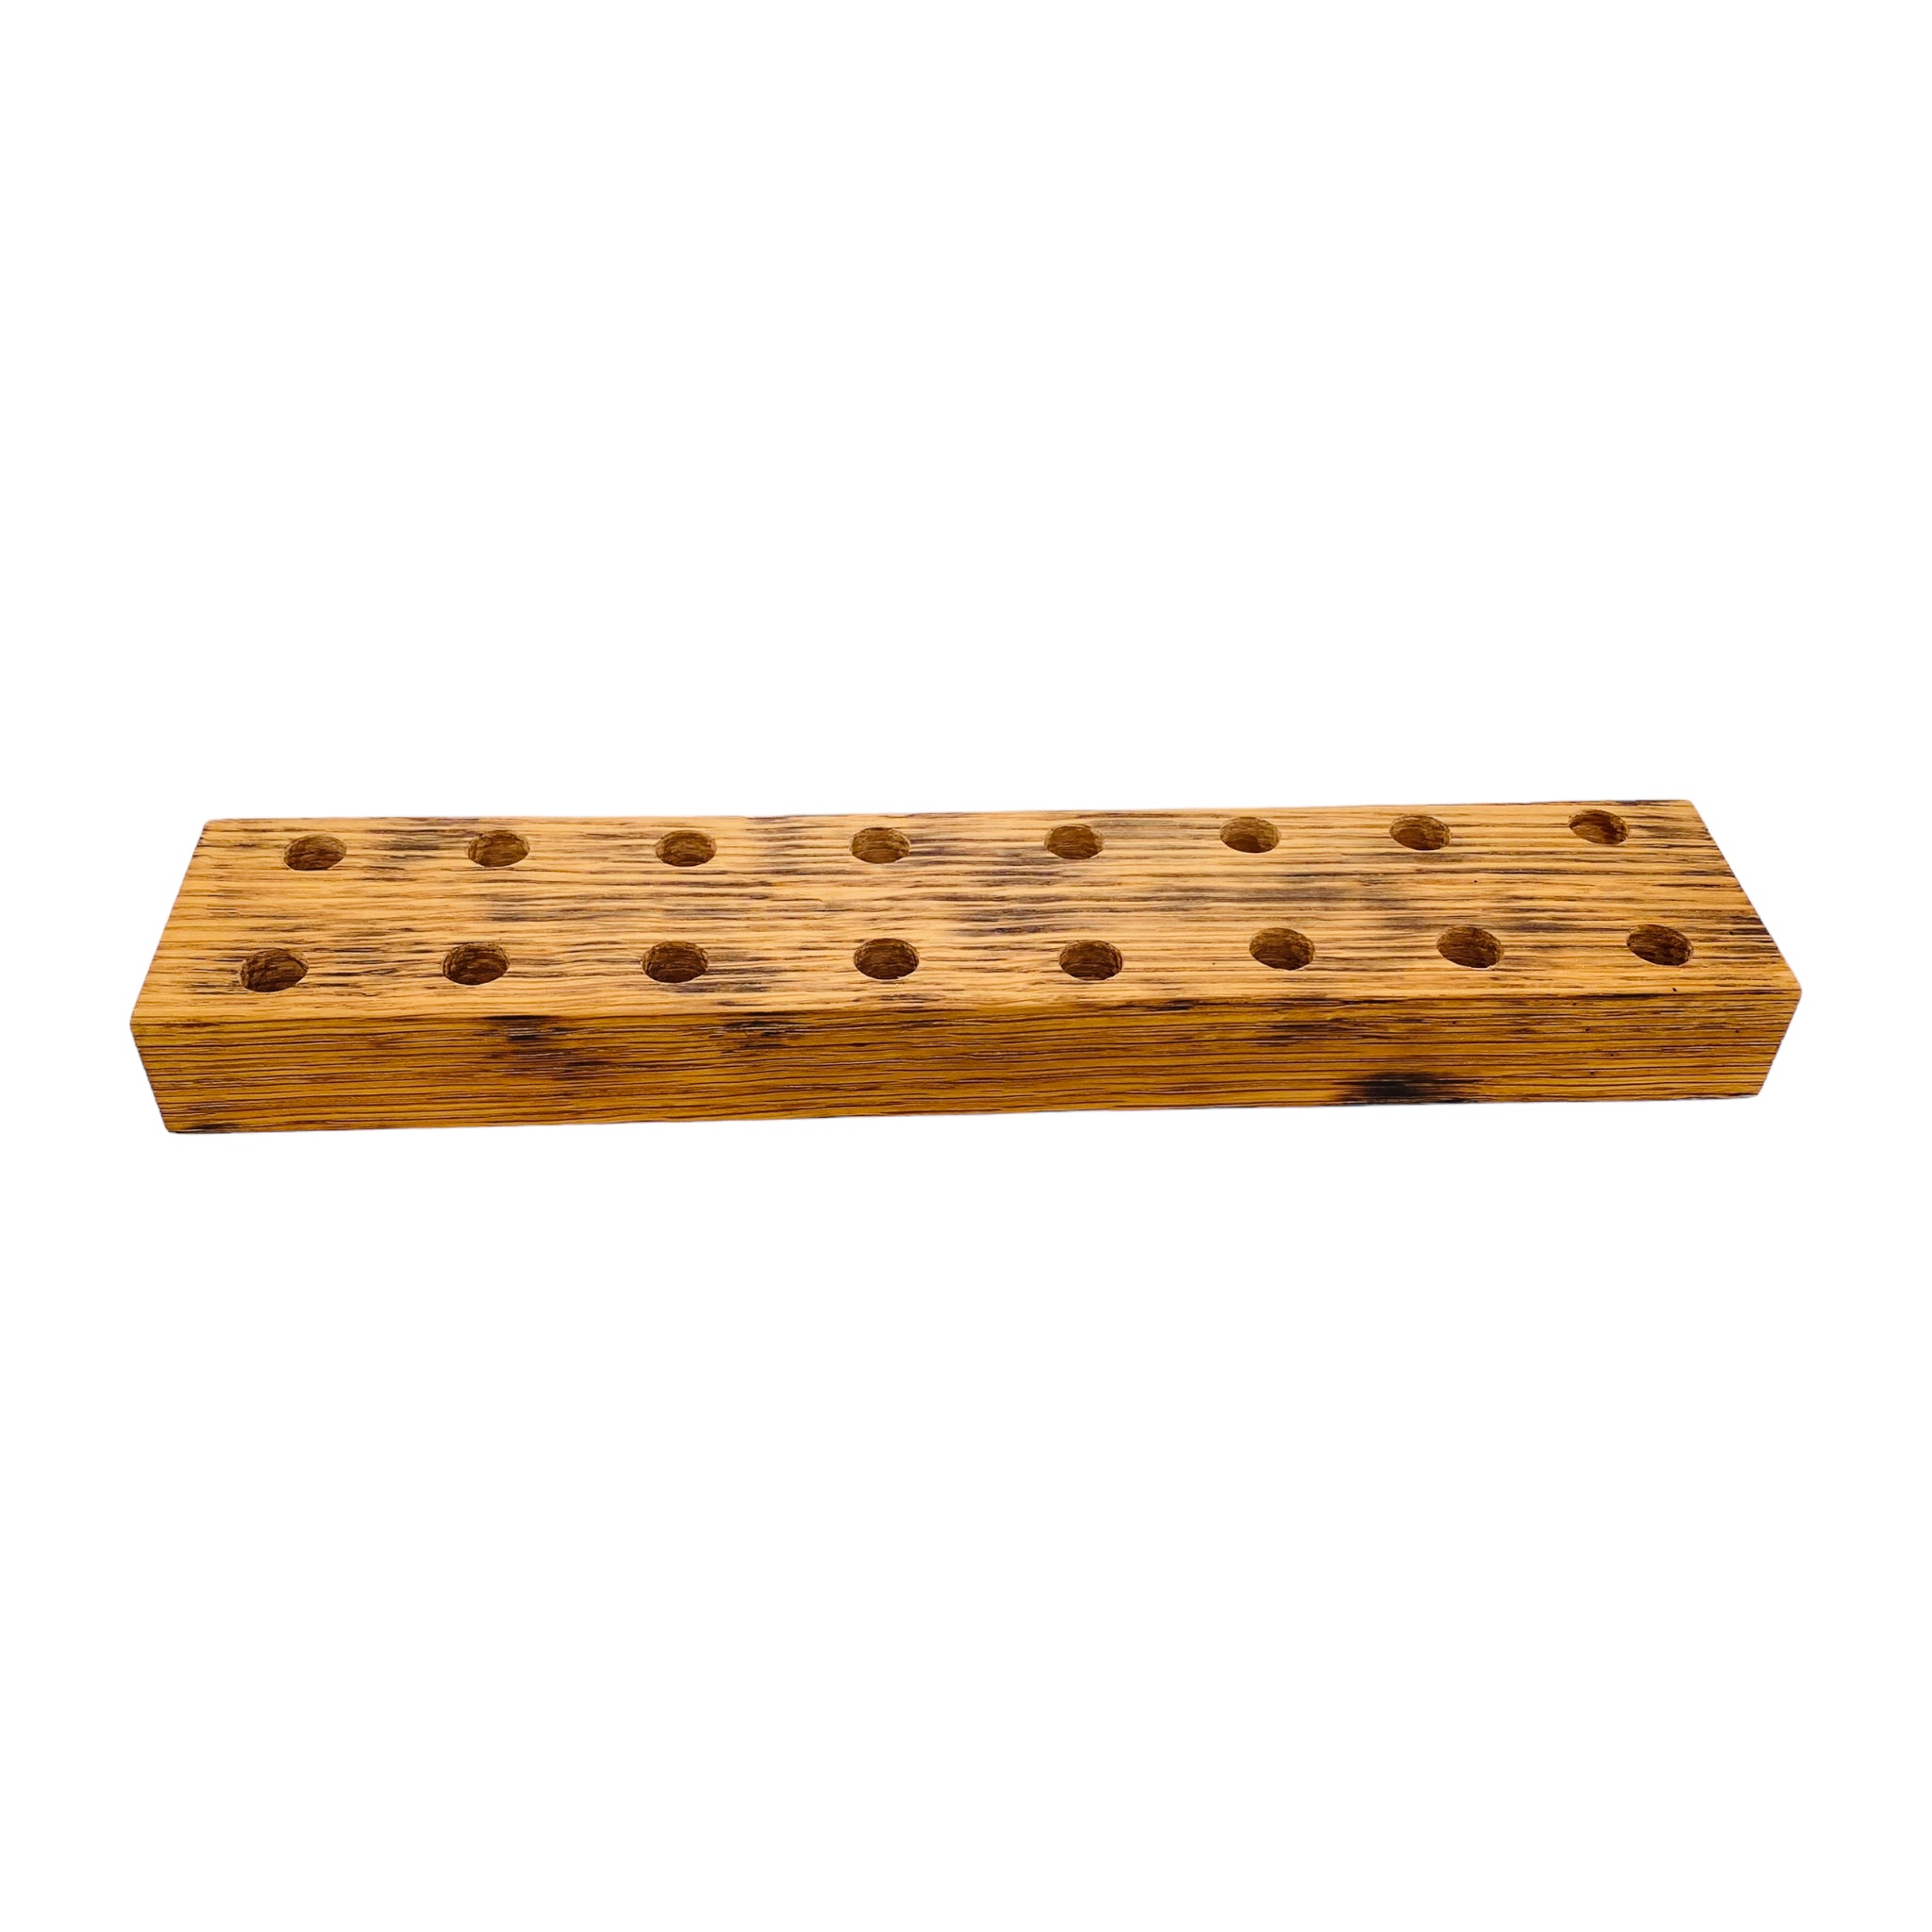 16 Hole Wood Display Stand Holder For 14mm Bong Bowl Pieces Or Quartz Bangers - Charred White Oak